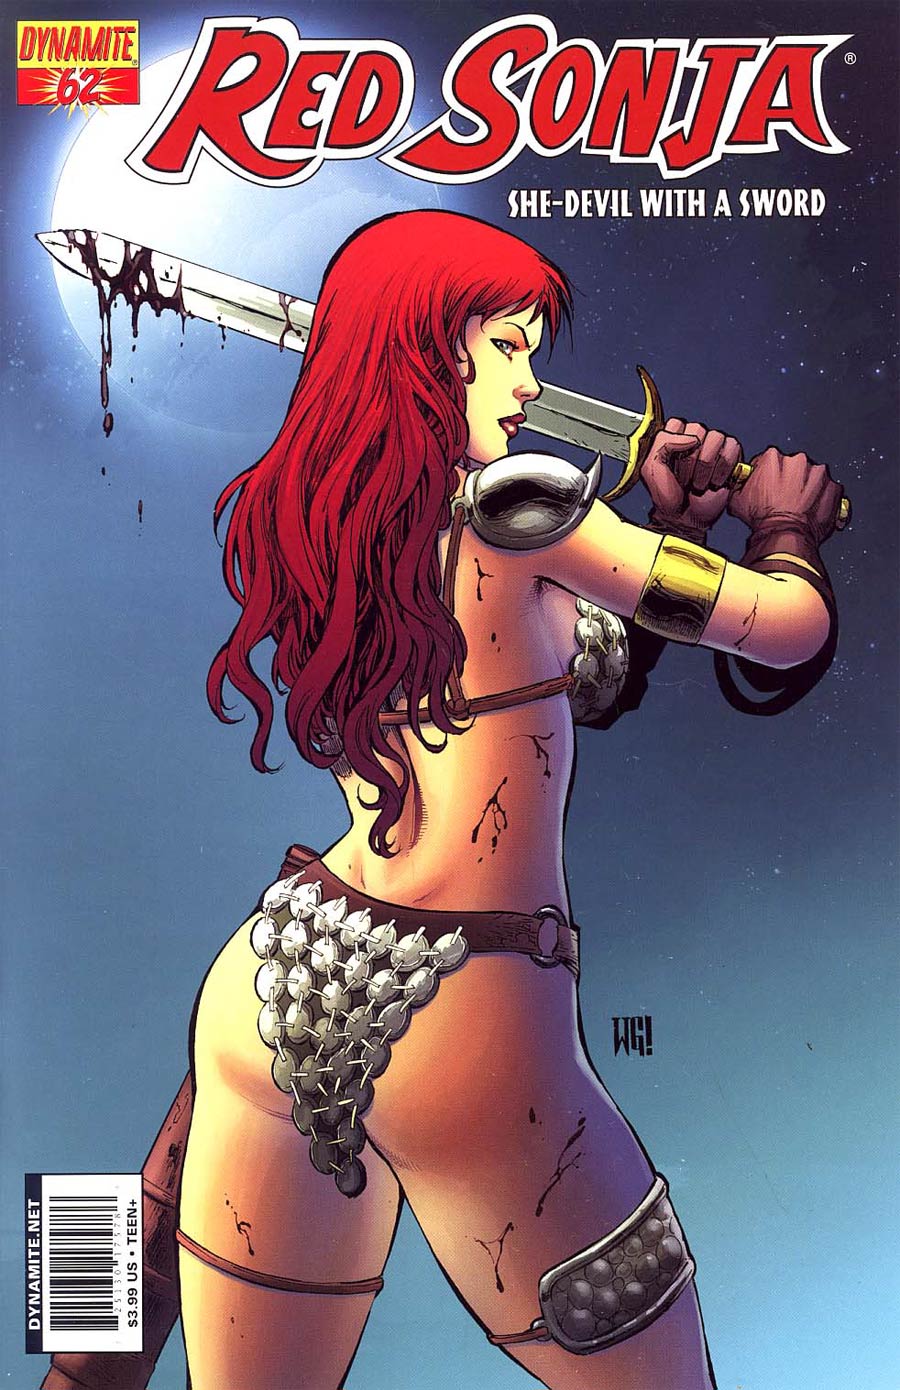 Red Sonja Vol 4 #62 Wagner Reis Cover